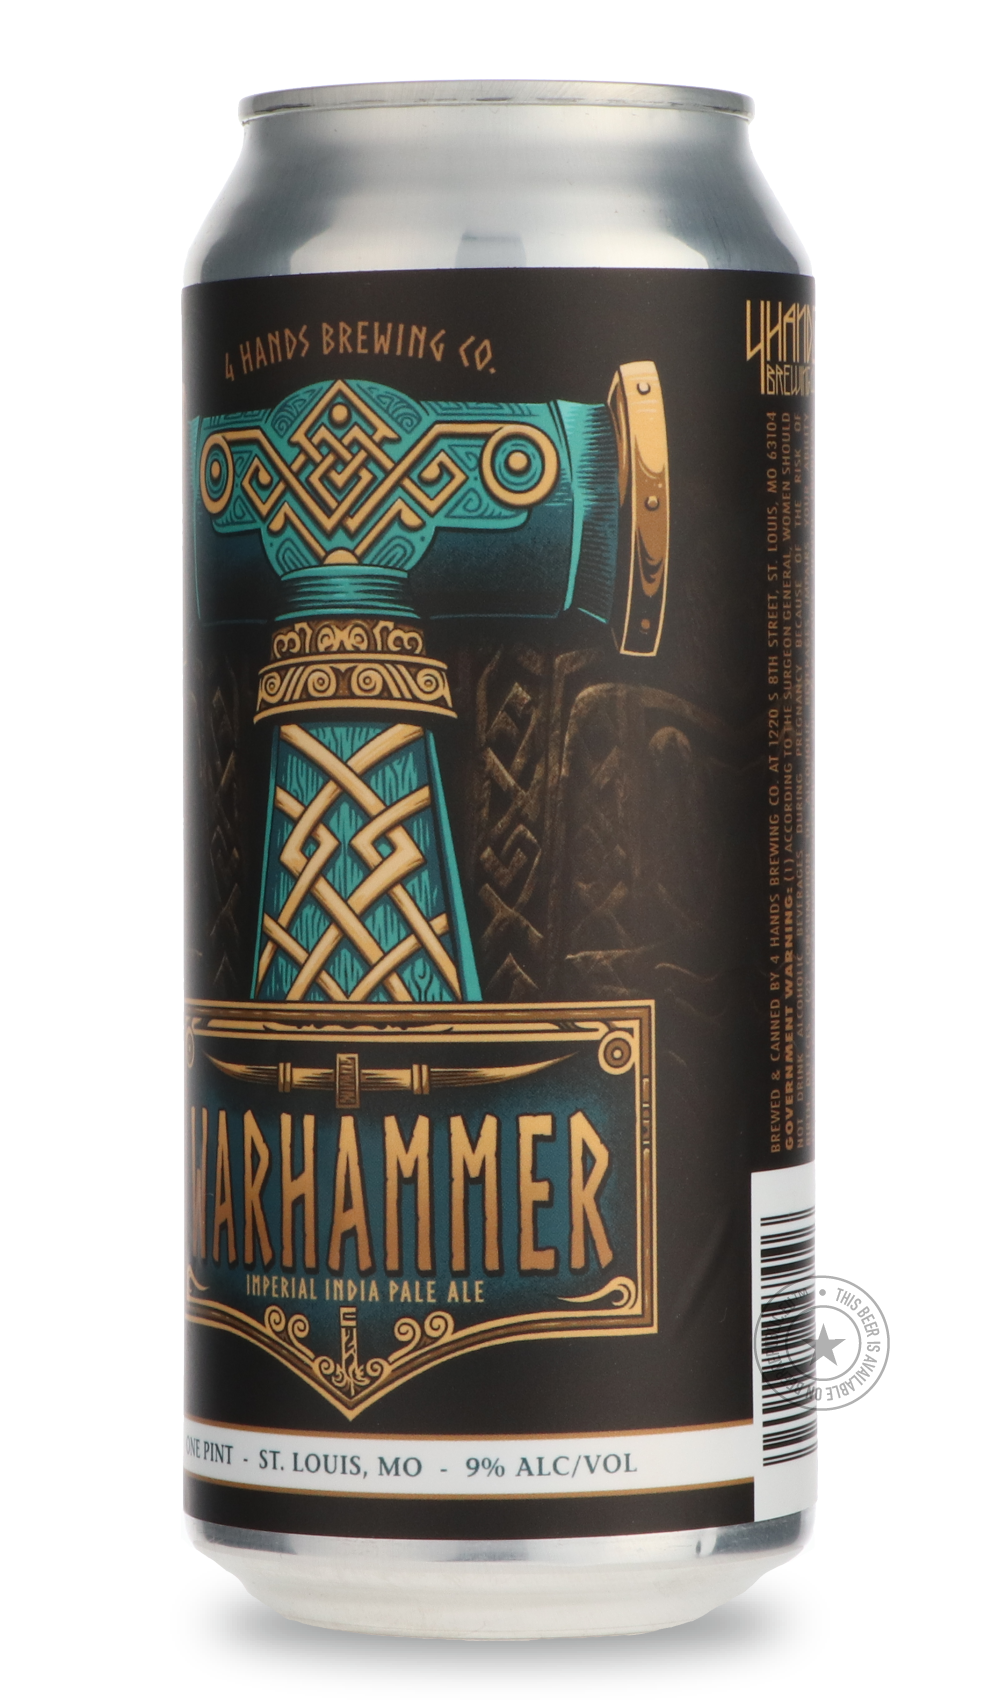 -4 Hands- War Hammer-IPA- Only @ Beer Republic - The best online beer store for American & Canadian craft beer - Buy beer online from the USA and Canada - Bier online kopen - Amerikaans bier kopen - Craft beer store - Craft beer kopen - Amerikanisch bier kaufen - Bier online kaufen - Acheter biere online - IPA - Stout - Porter - New England IPA - Hazy IPA - Imperial Stout - Barrel Aged - Barrel Aged Imperial Stout - Brown - Dark beer - Blond - Blonde - Pilsner - Lager - Wheat - Weizen - Amber - Barley Wine 